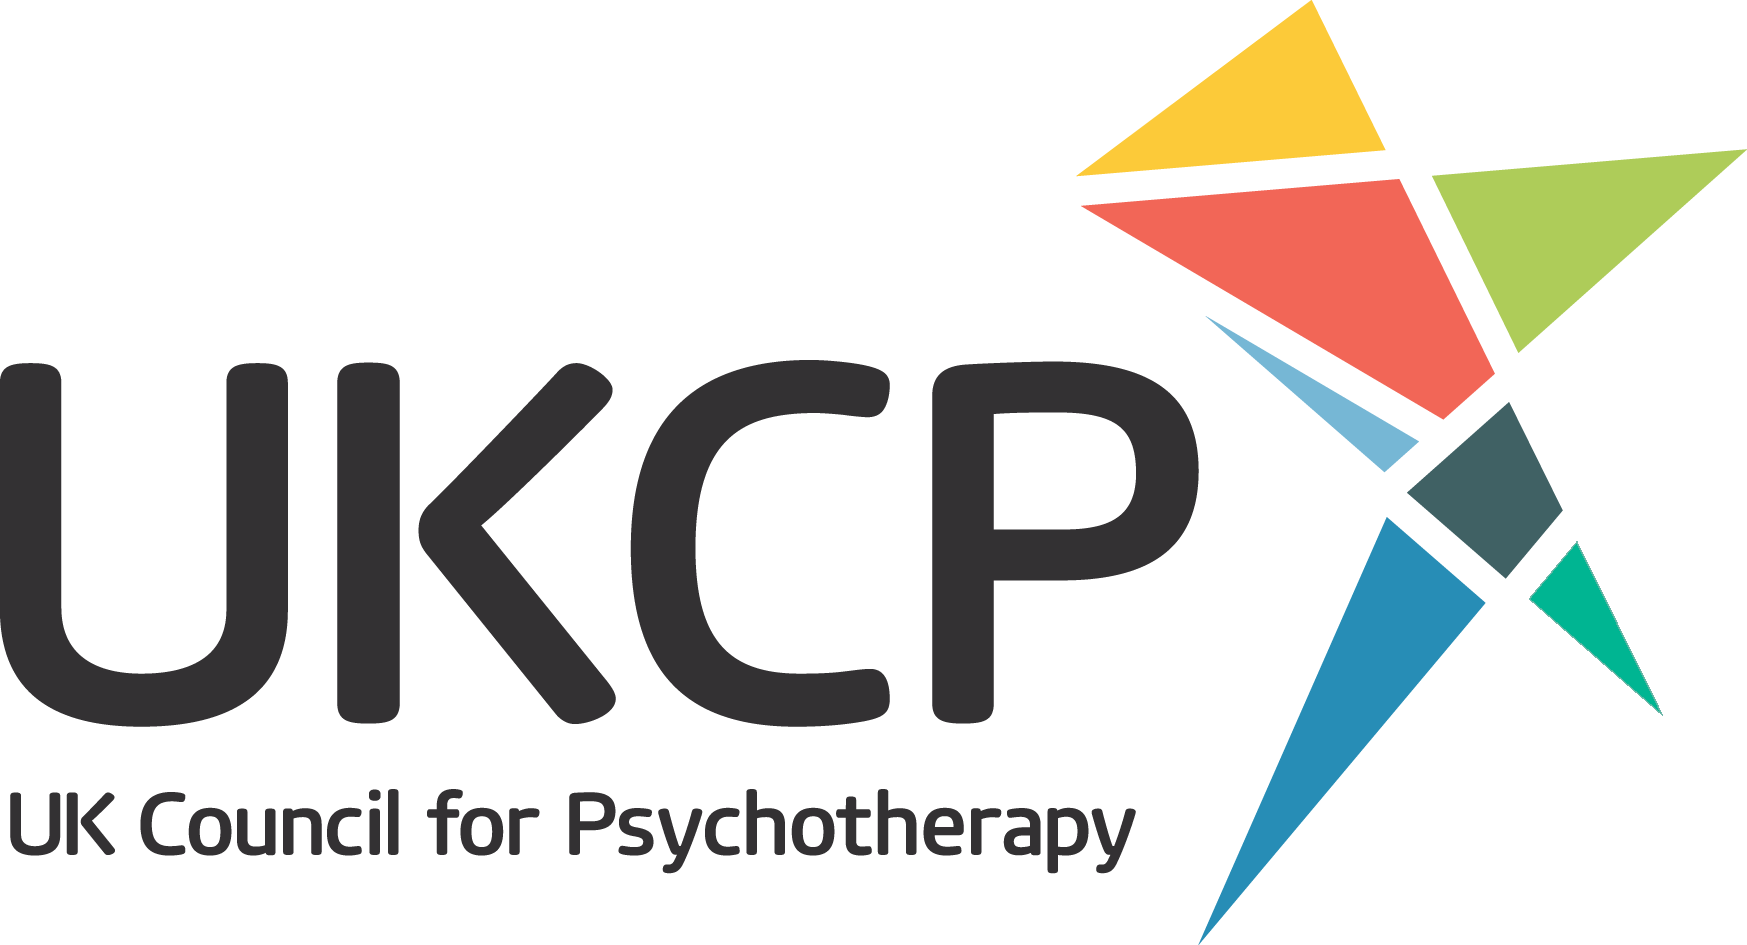 United Kingdon Council for Psychotherapy logo (1) (1)